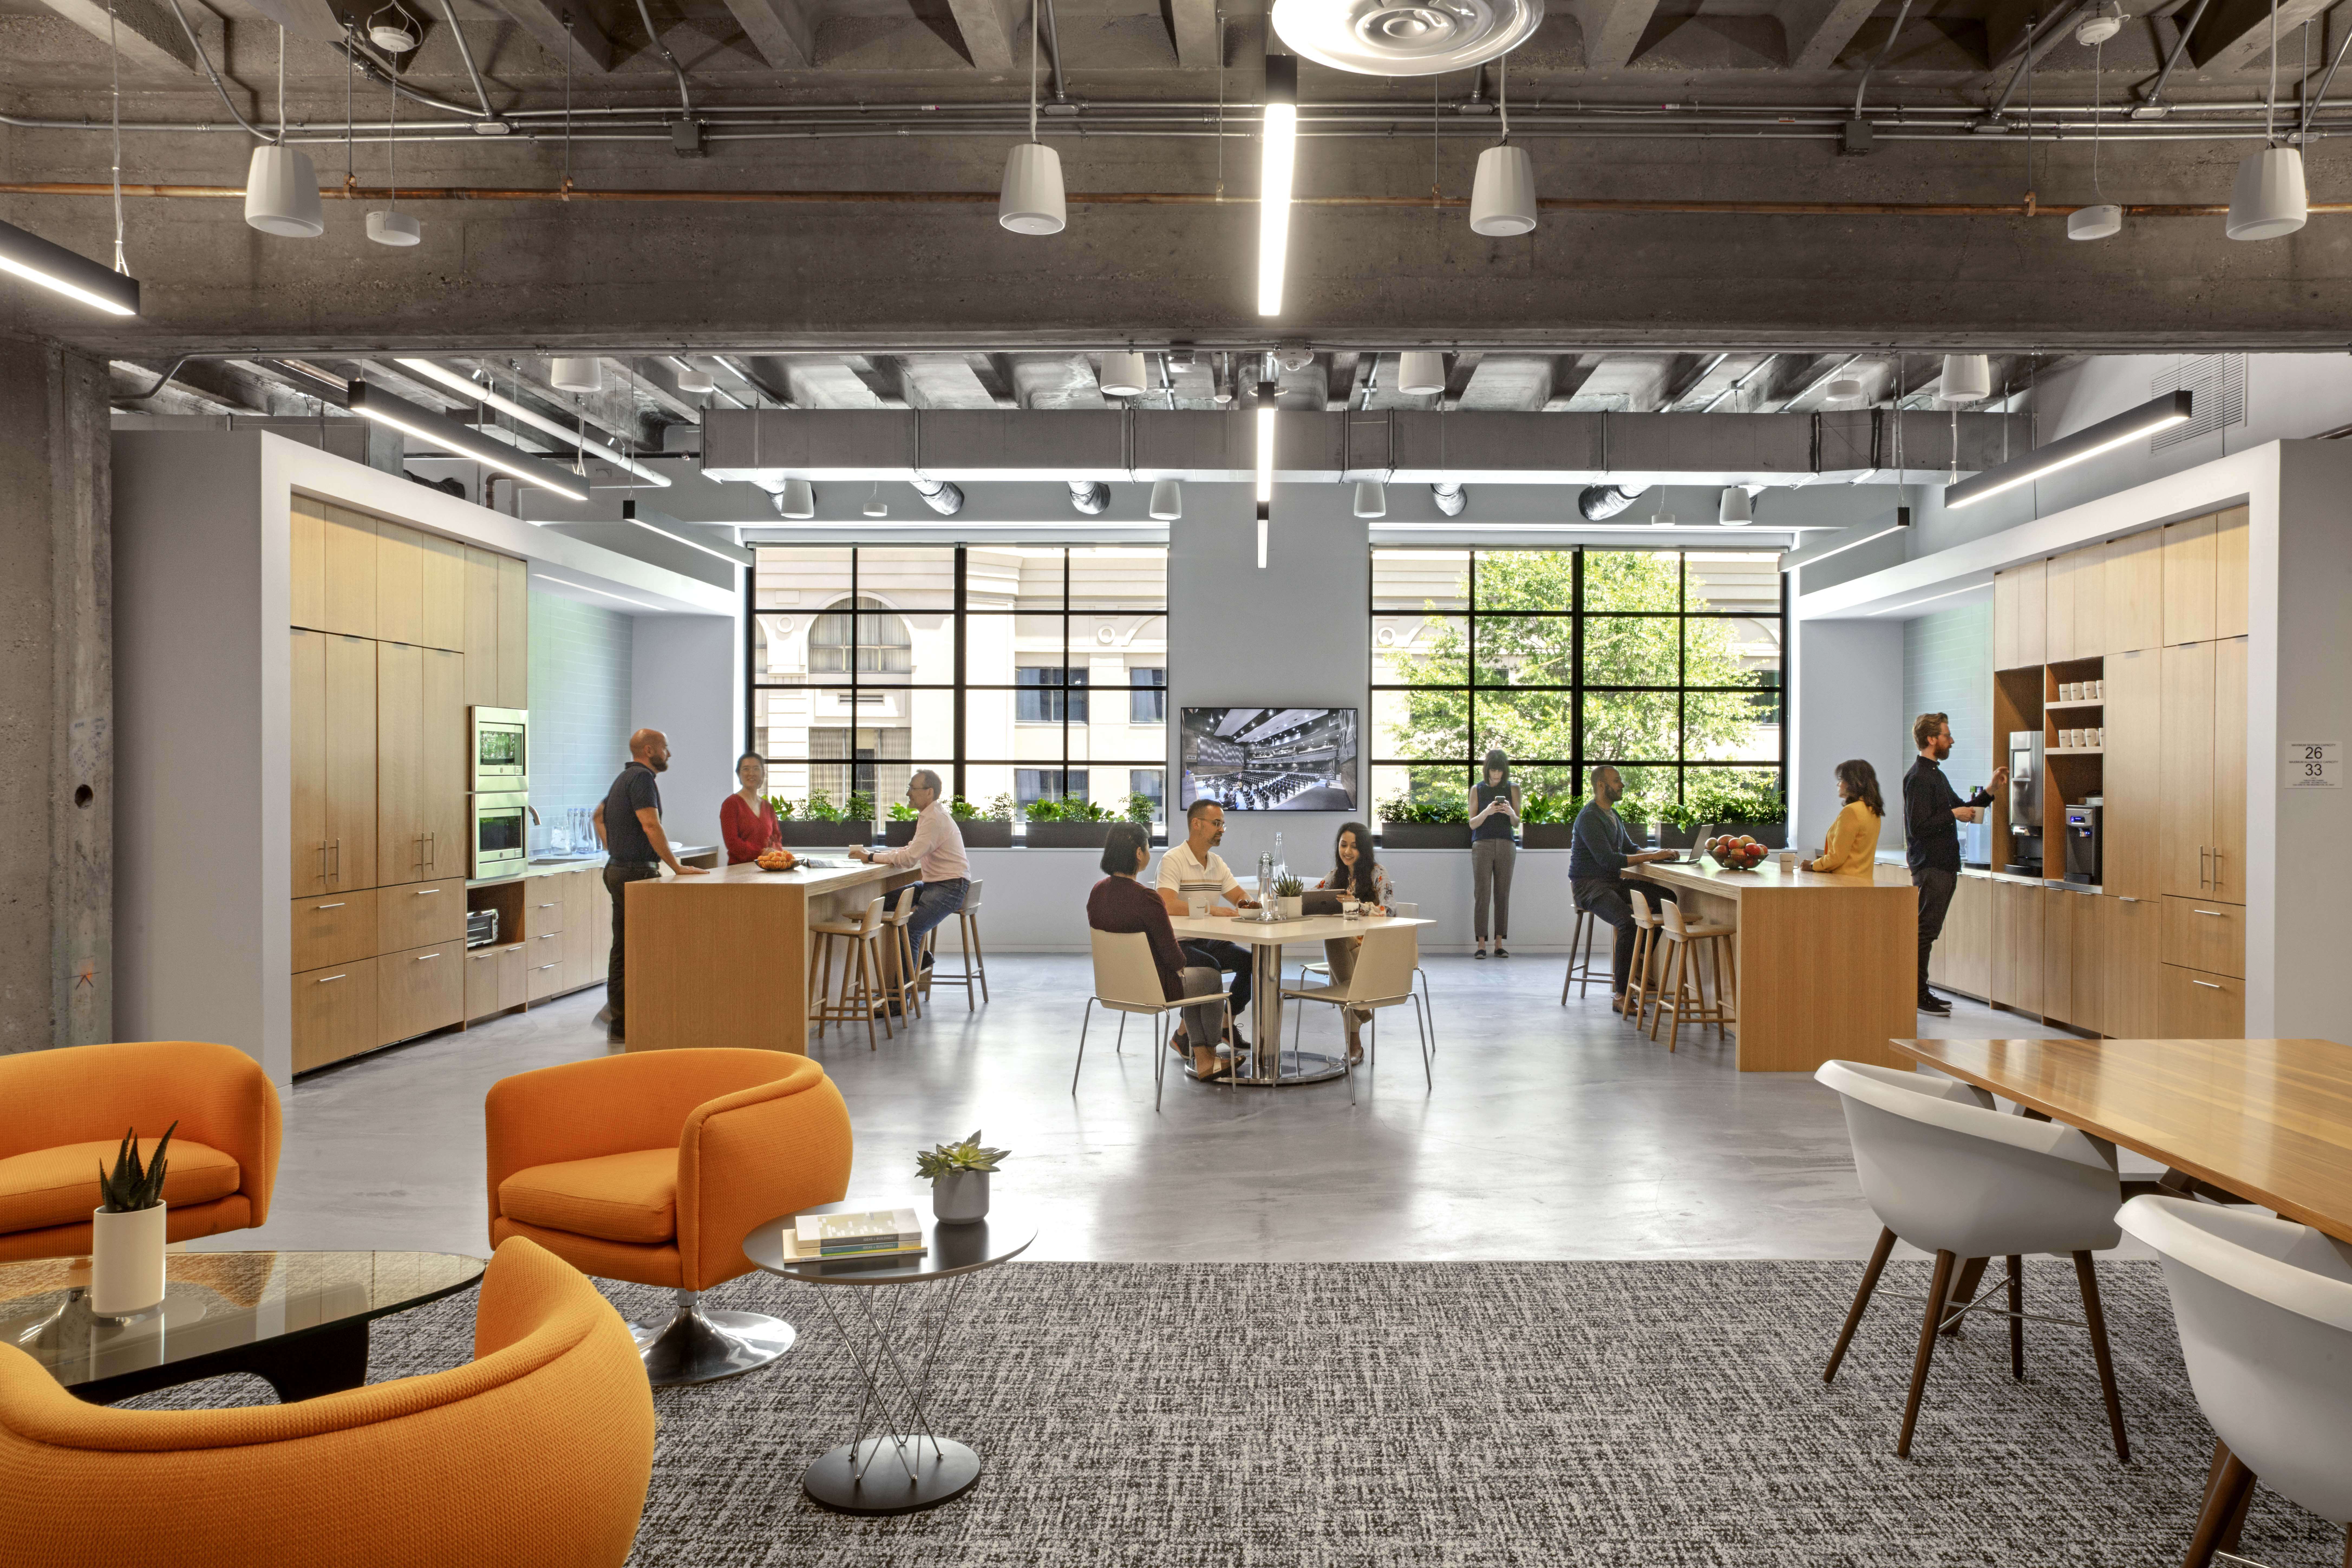 Sustainable office design strategies include salvaging millwork and reusing furniture.